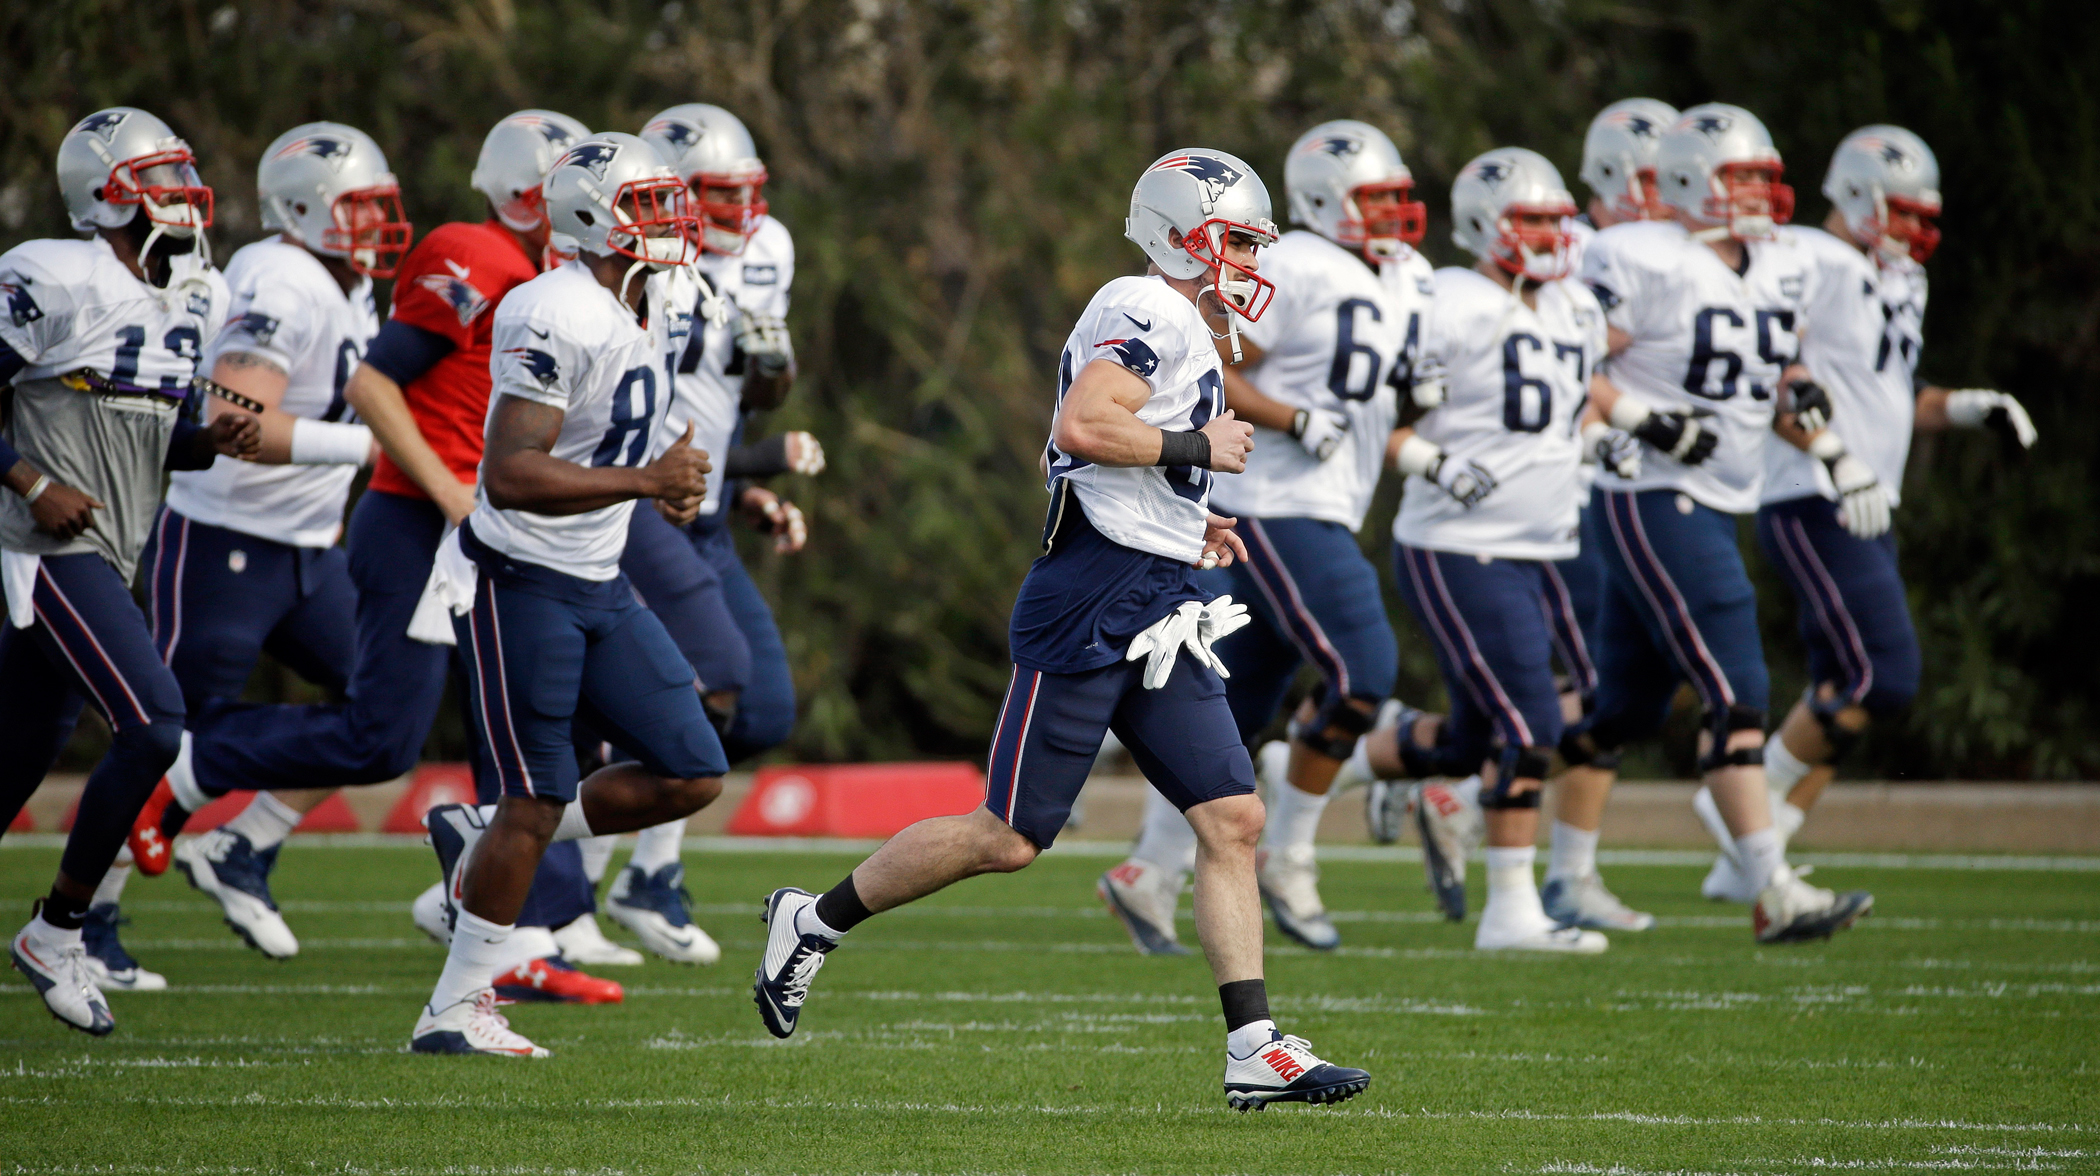 New England Patriots players warm up during practice Wednesday, Jan. 28, 2015, in Tempe, Ariz. The Patriots play the Seattle Seahawks in NFL football Super Bowl XLIX Sunday, Feb. 1, in Glendale, Ariz.150129_EM_SBNumbers_Payroll